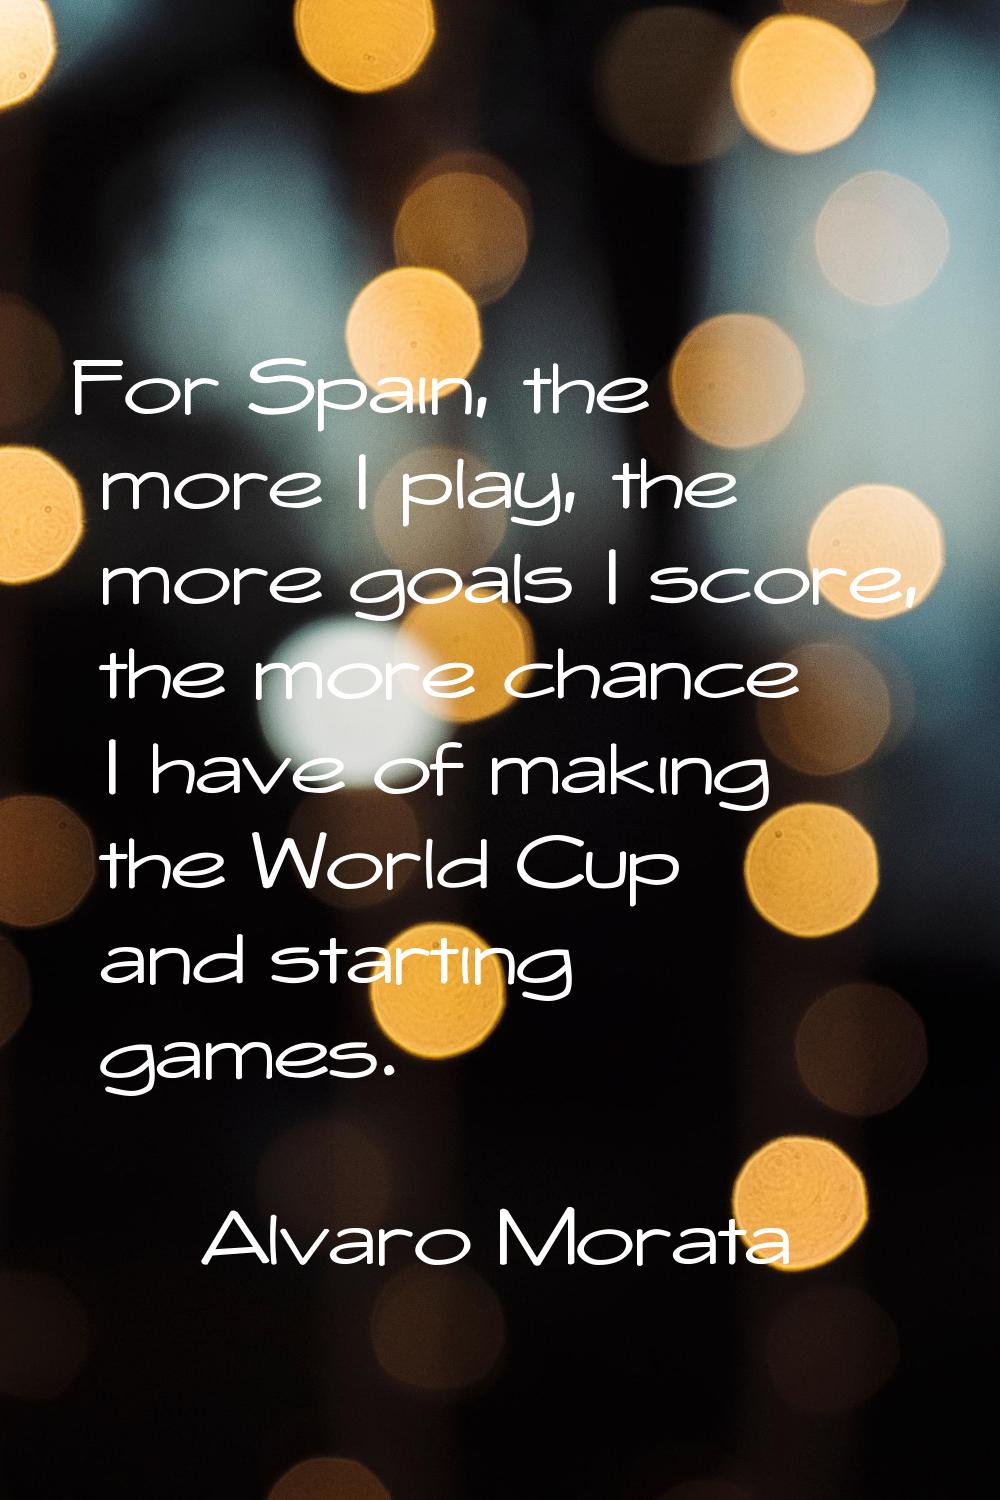 For Spain, the more I play, the more goals I score, the more chance I have of making the World Cup 